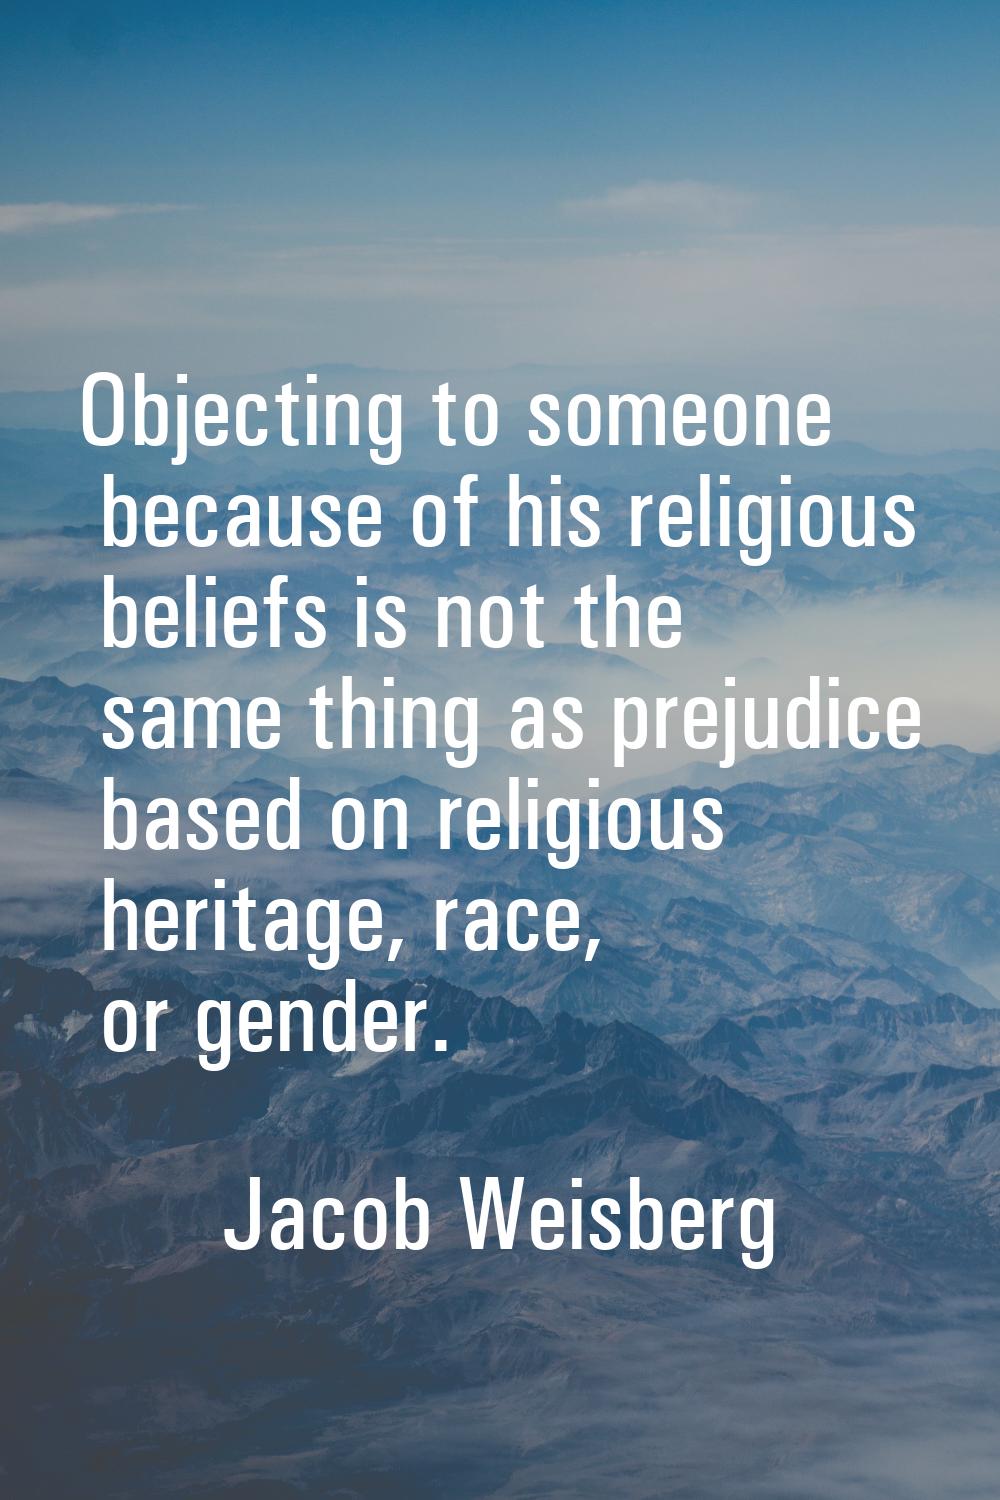 Objecting to someone because of his religious beliefs is not the same thing as prejudice based on r